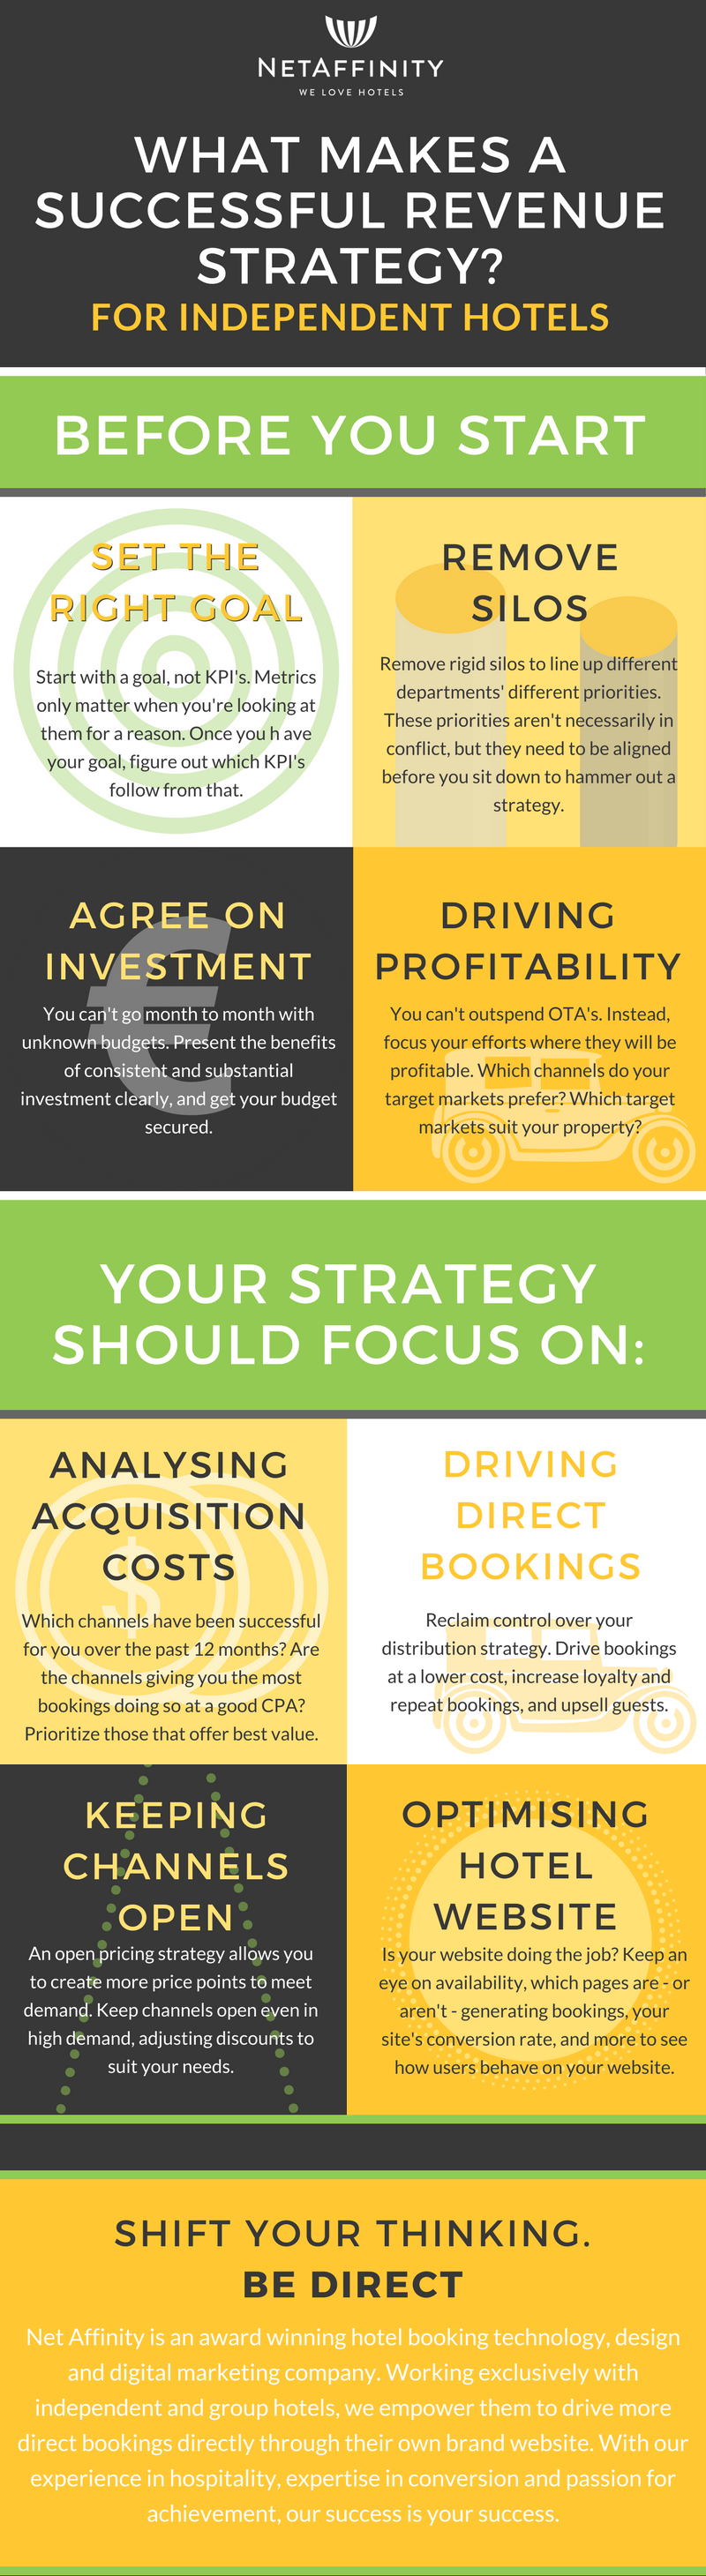 What makes a successful revenue strategy infographic